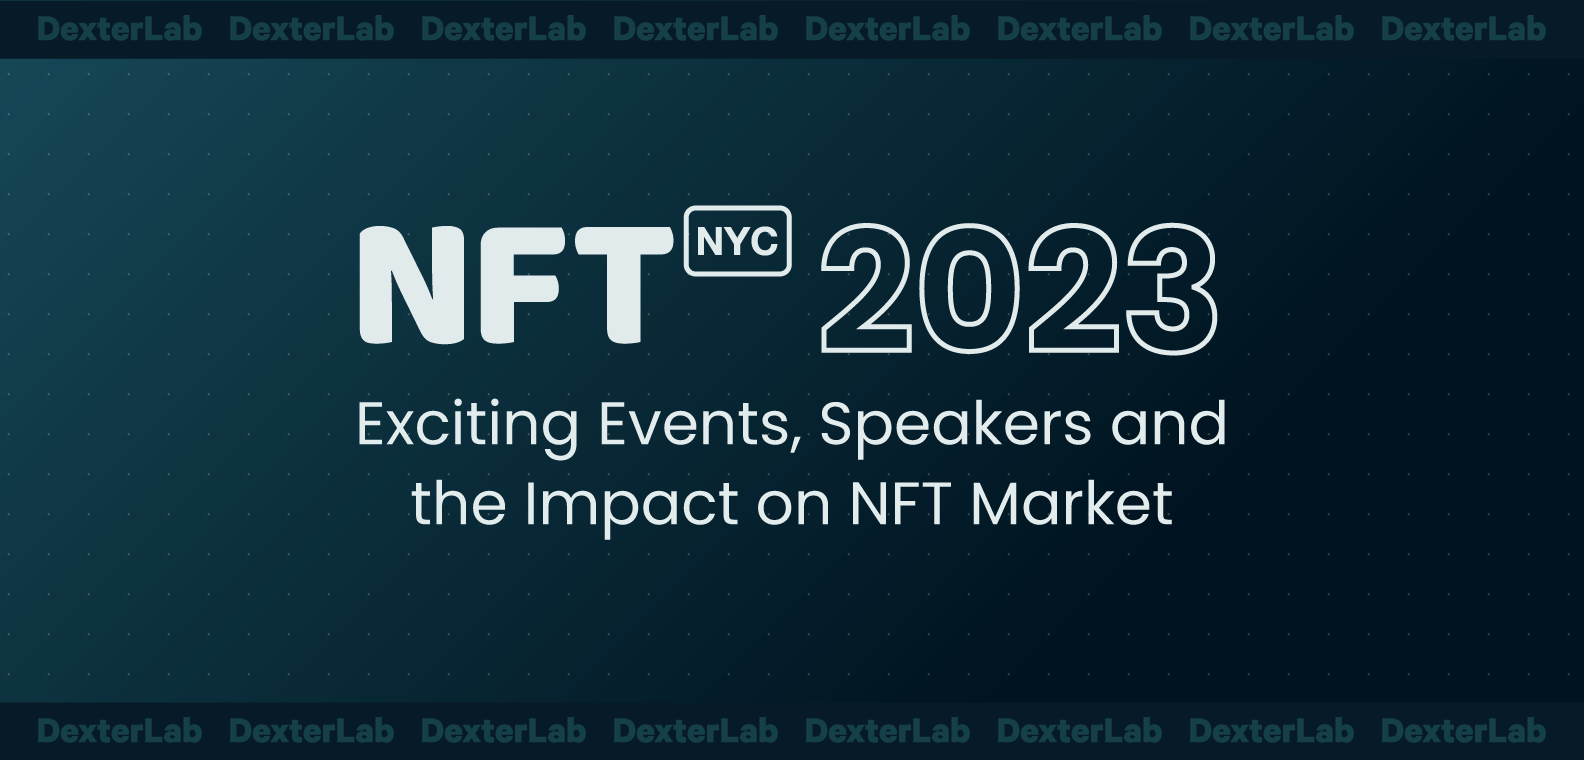 NFT NYC 2023: Exciting Events, Speakers, And The Impact On NFT Market